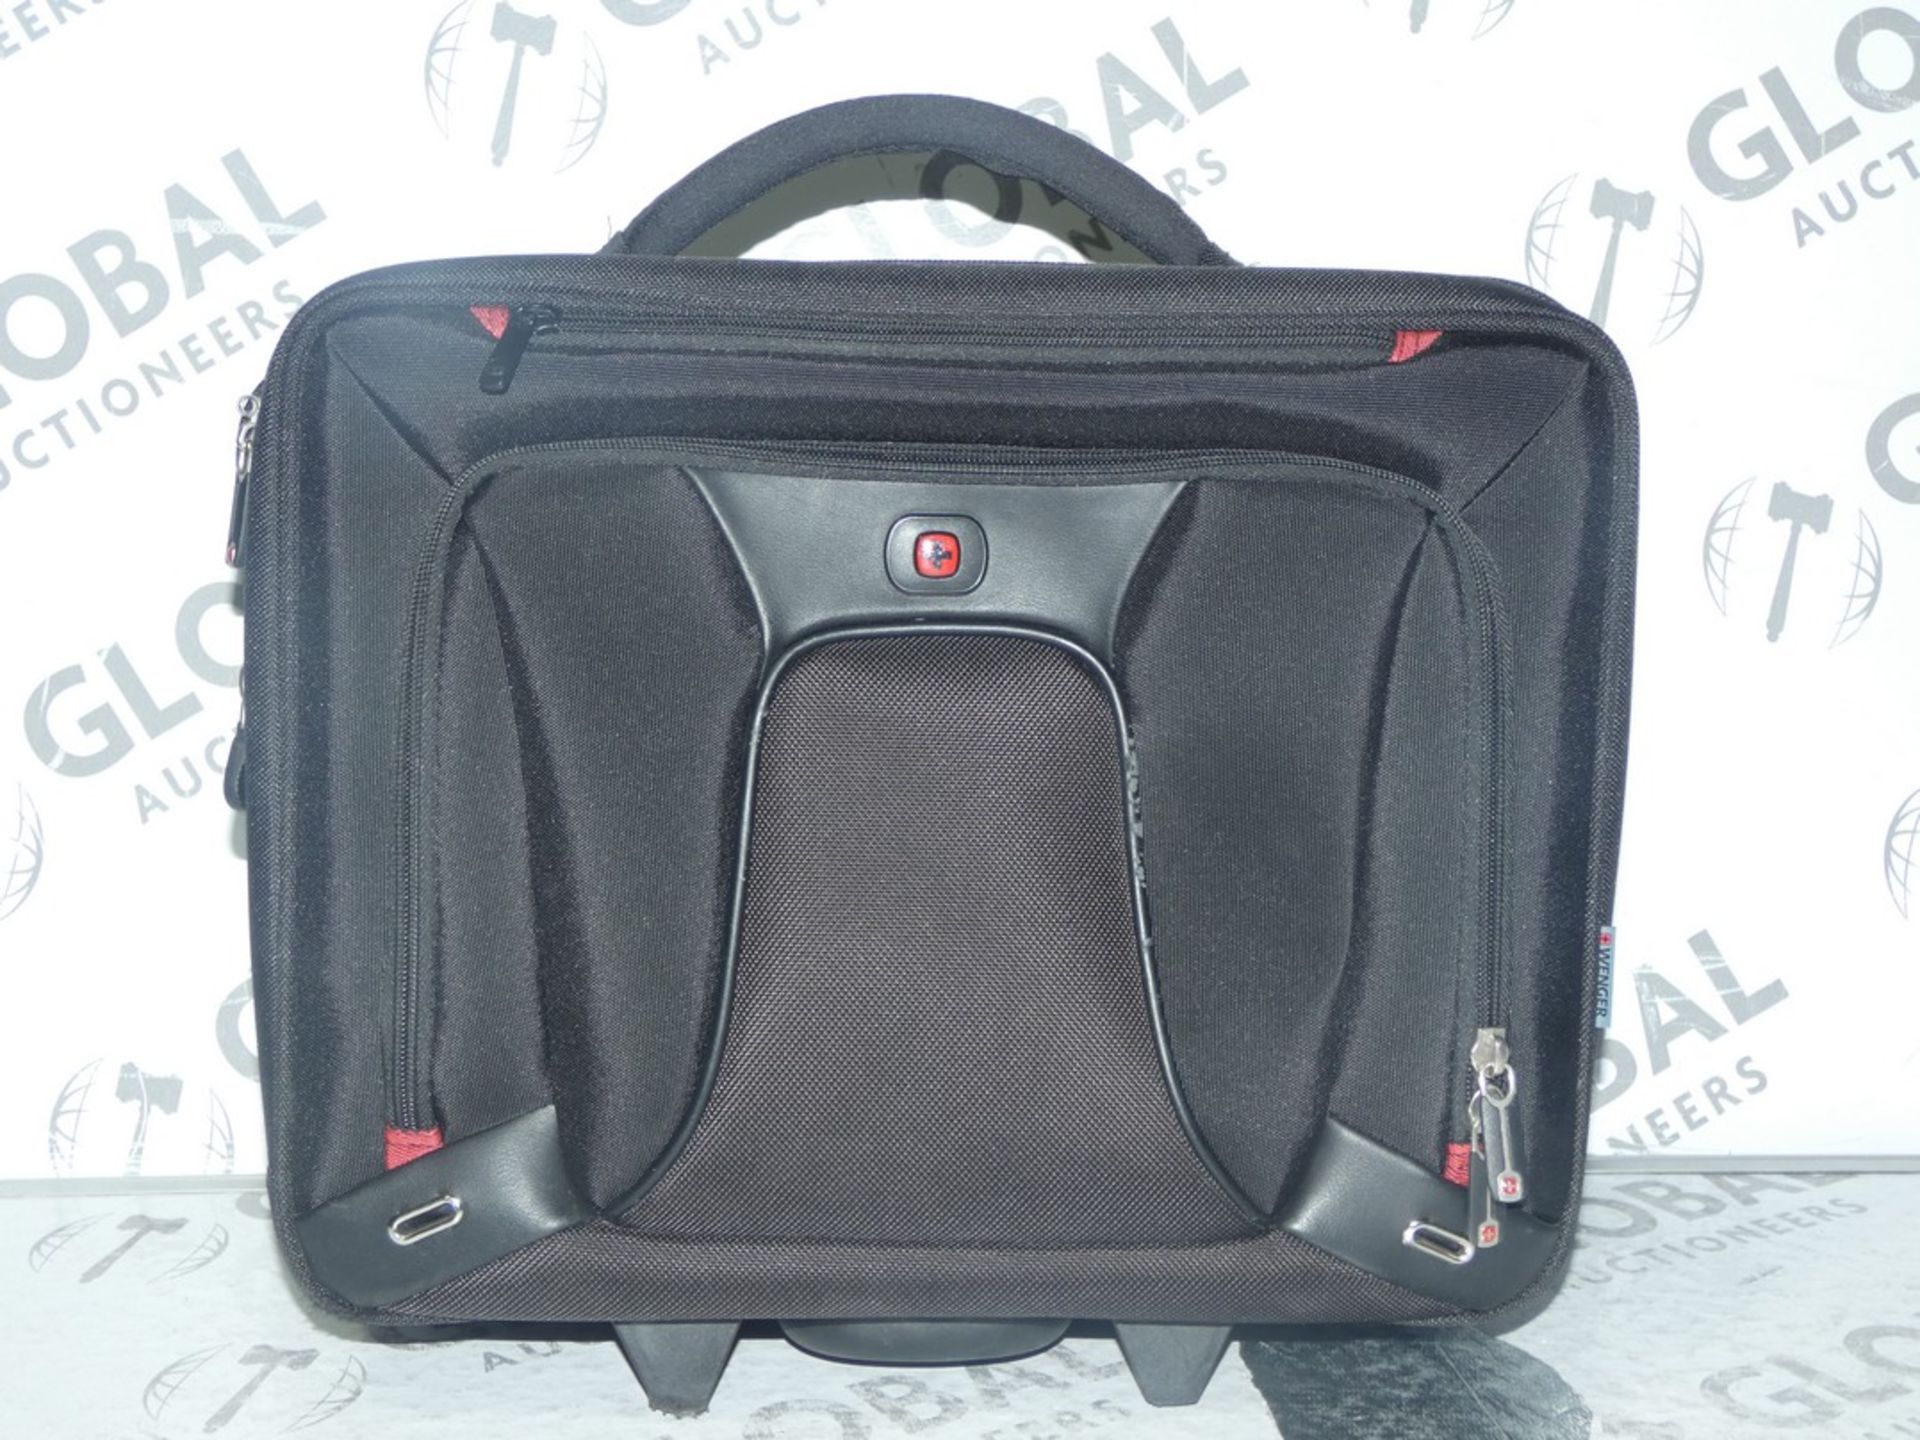 Wenga Wheeled Rolling Protective Laptop Briefcase RRP£100.0 (Viewings And Appraisals Highly